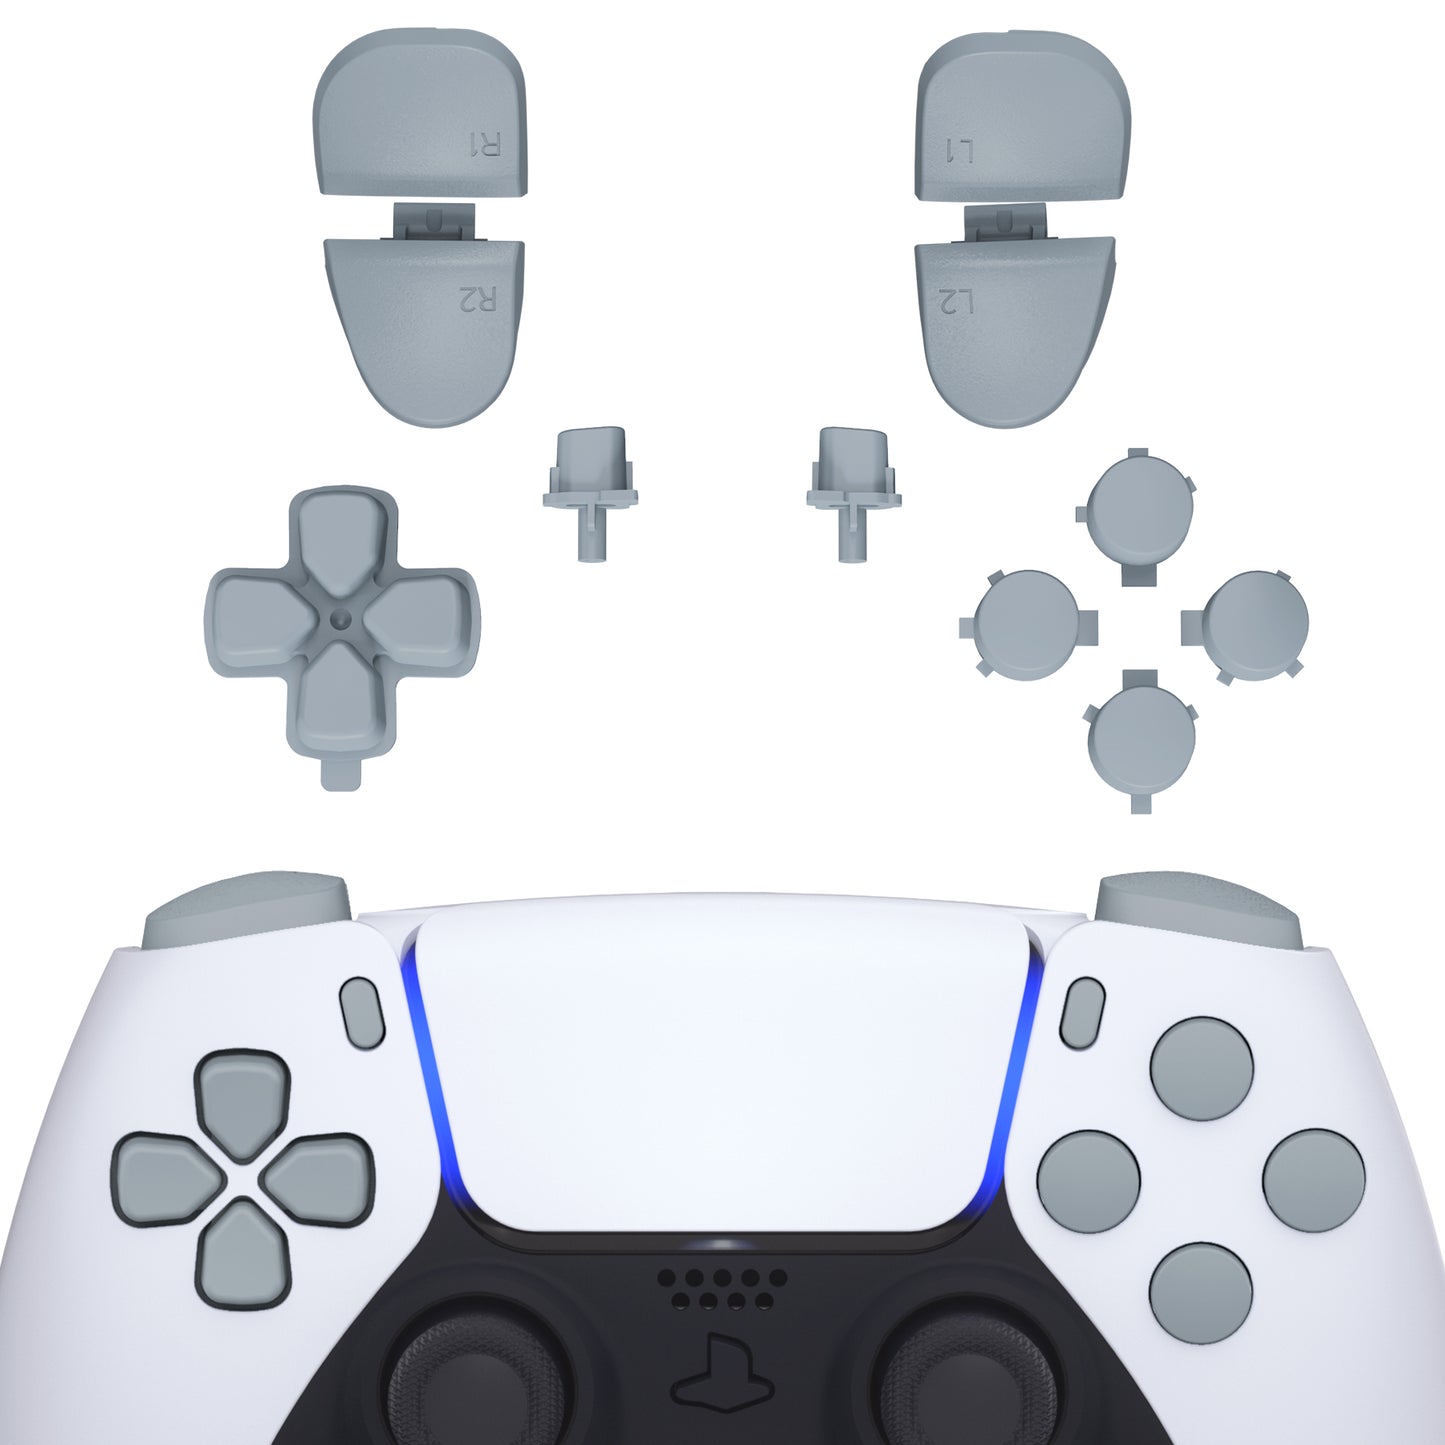 eXtremeRate Retail Replacement D-pad R1 L1 R2 L2 Triggers Share Options Face Buttons, New Hope Gray Full Set Buttons Compatible with ps5 Controller BDM-030 - JPF1037G3